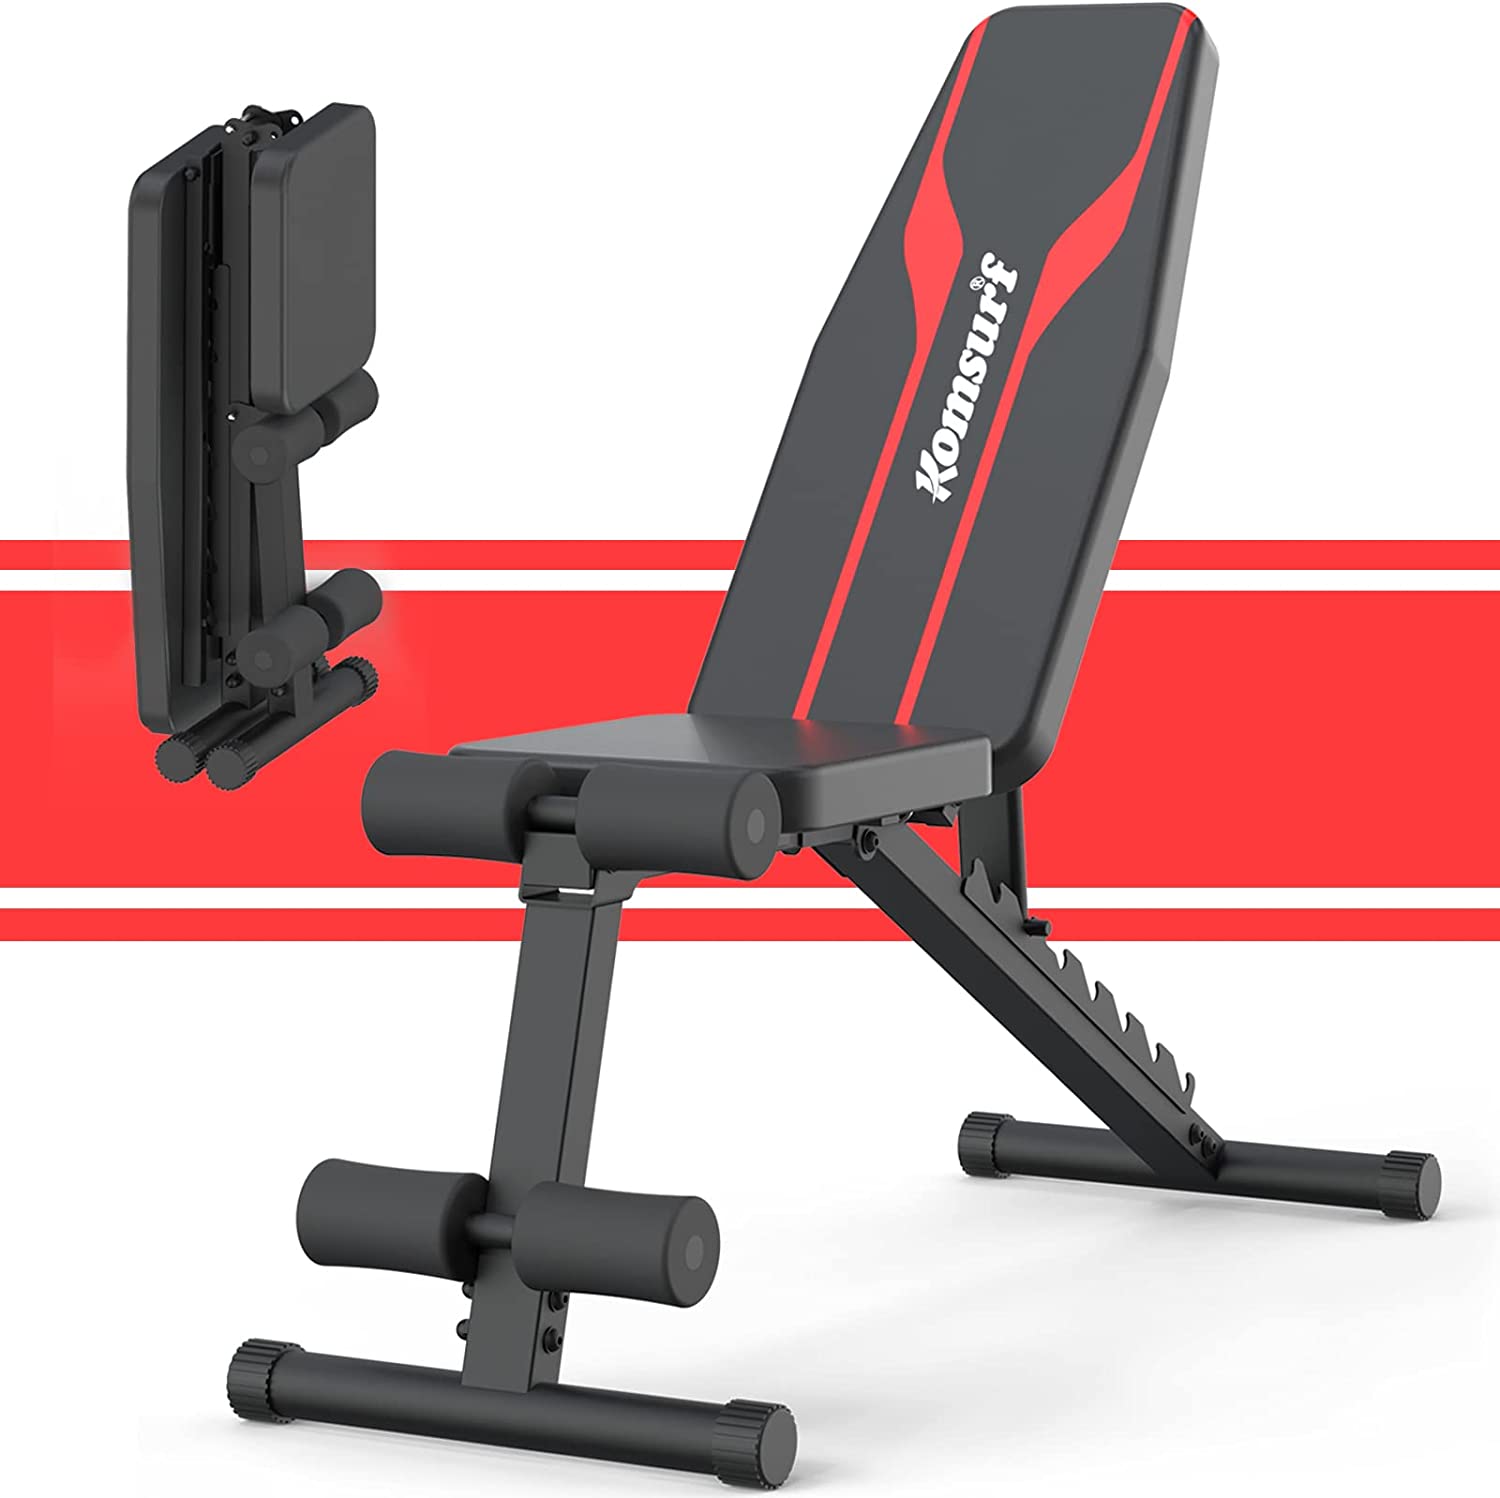 Komsurf Weight Bench – Great Workout Bench for Home Fitness Training